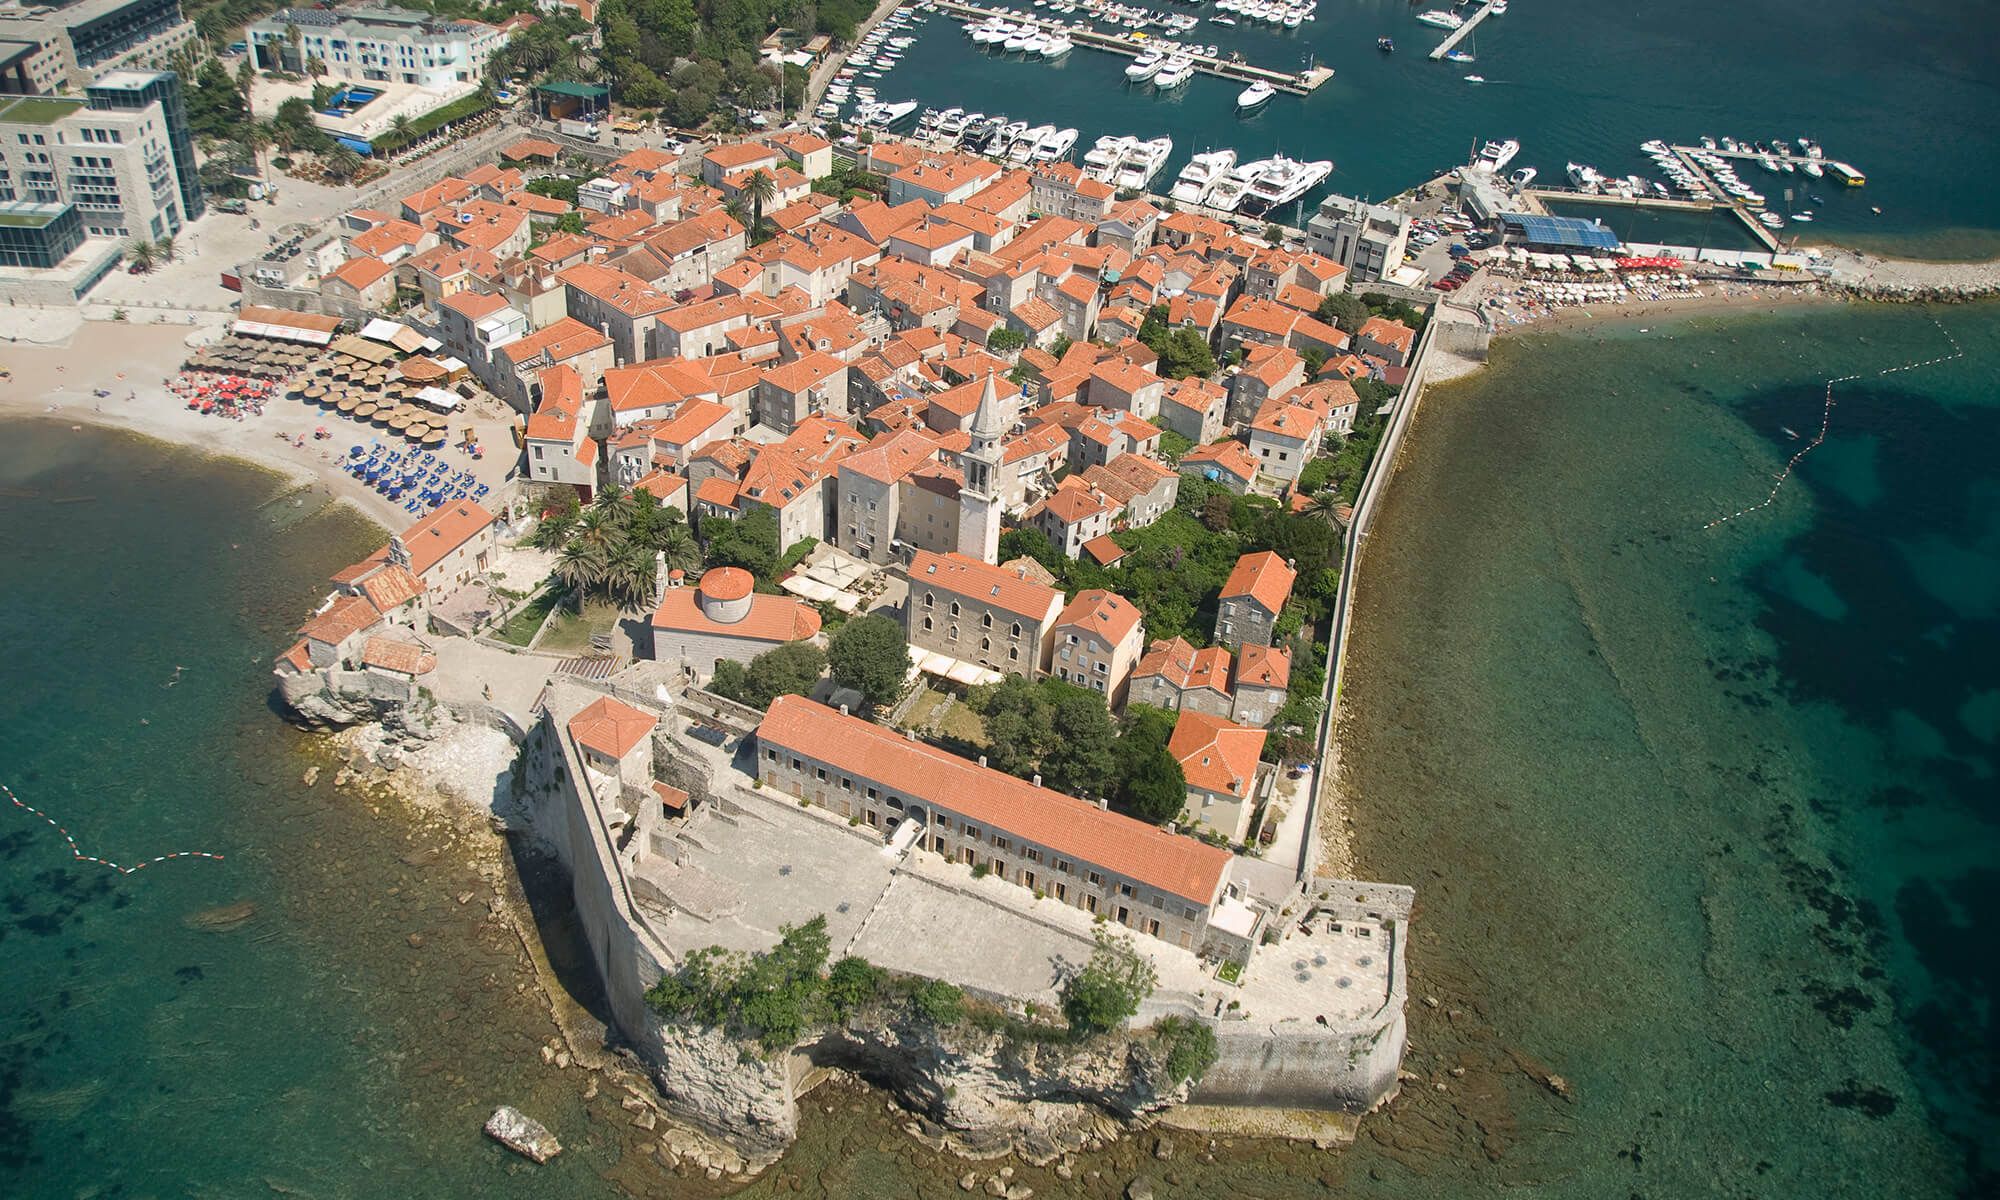 Budva listed as Number One Holiday Destination for Summer 2019 by Macedonian Portal Radar.mk 2